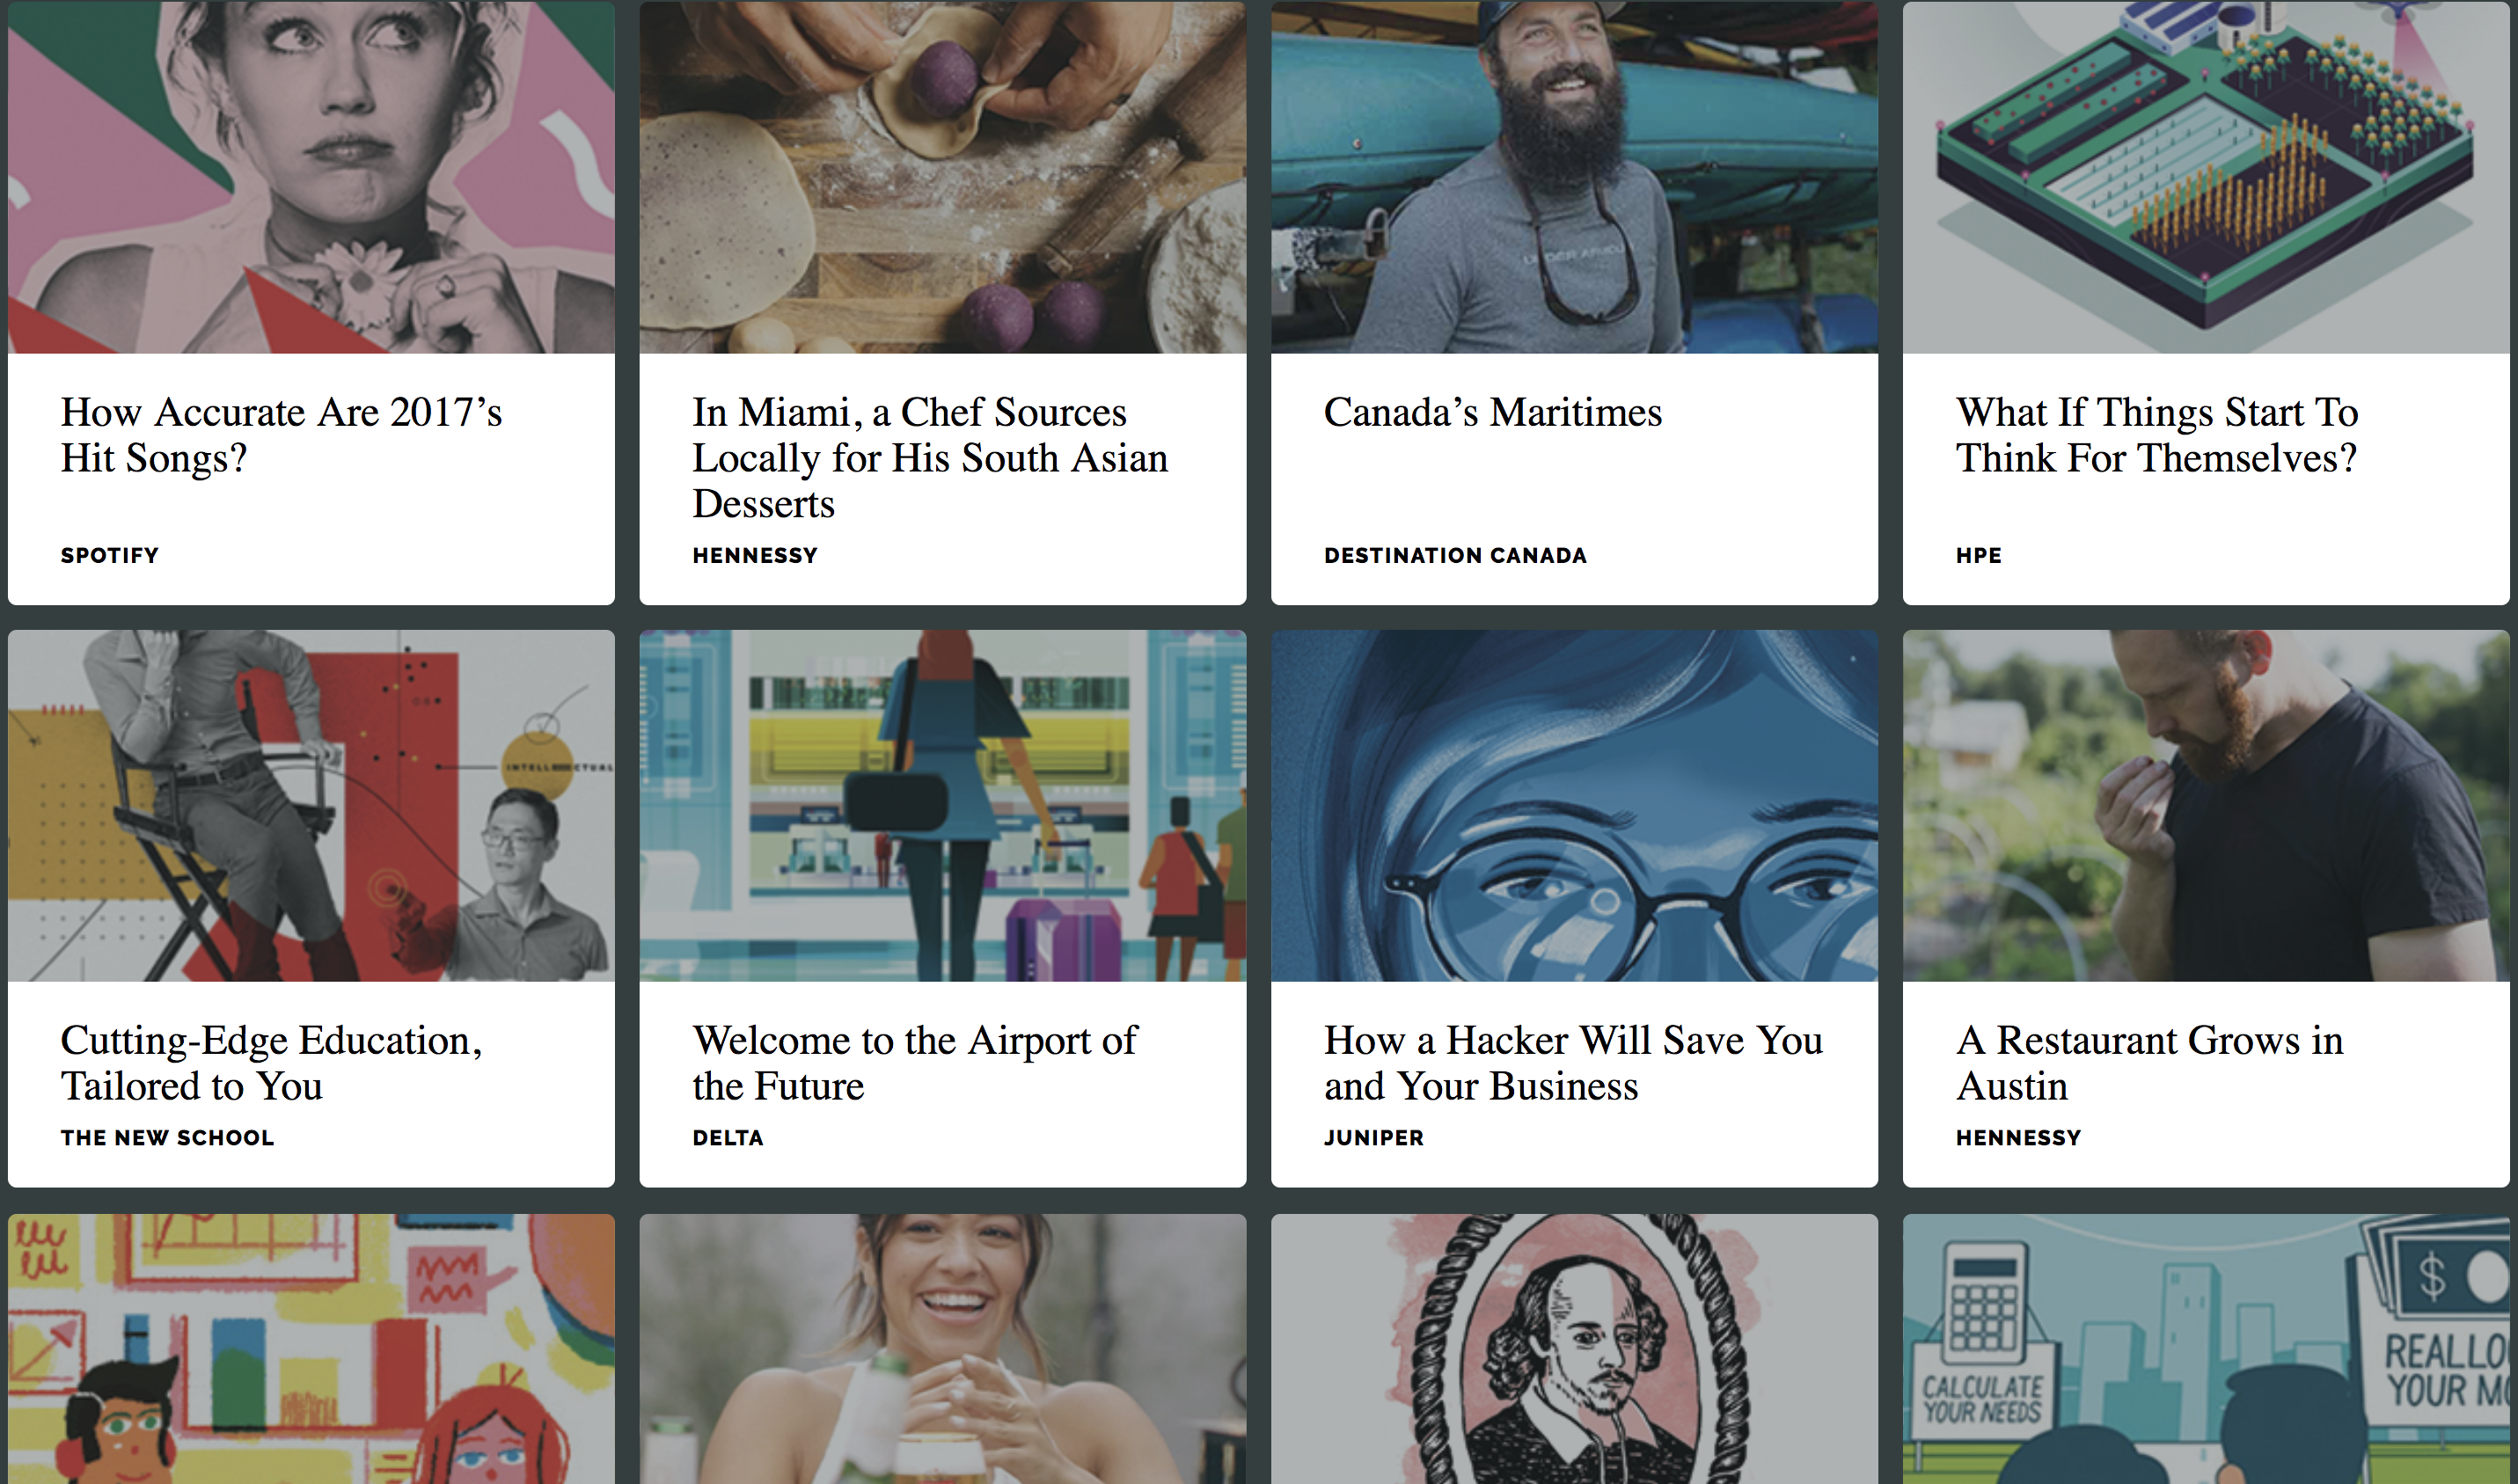 Some of the recent paid native advertising created by T Brand Studio, the branded content team of The New York Times